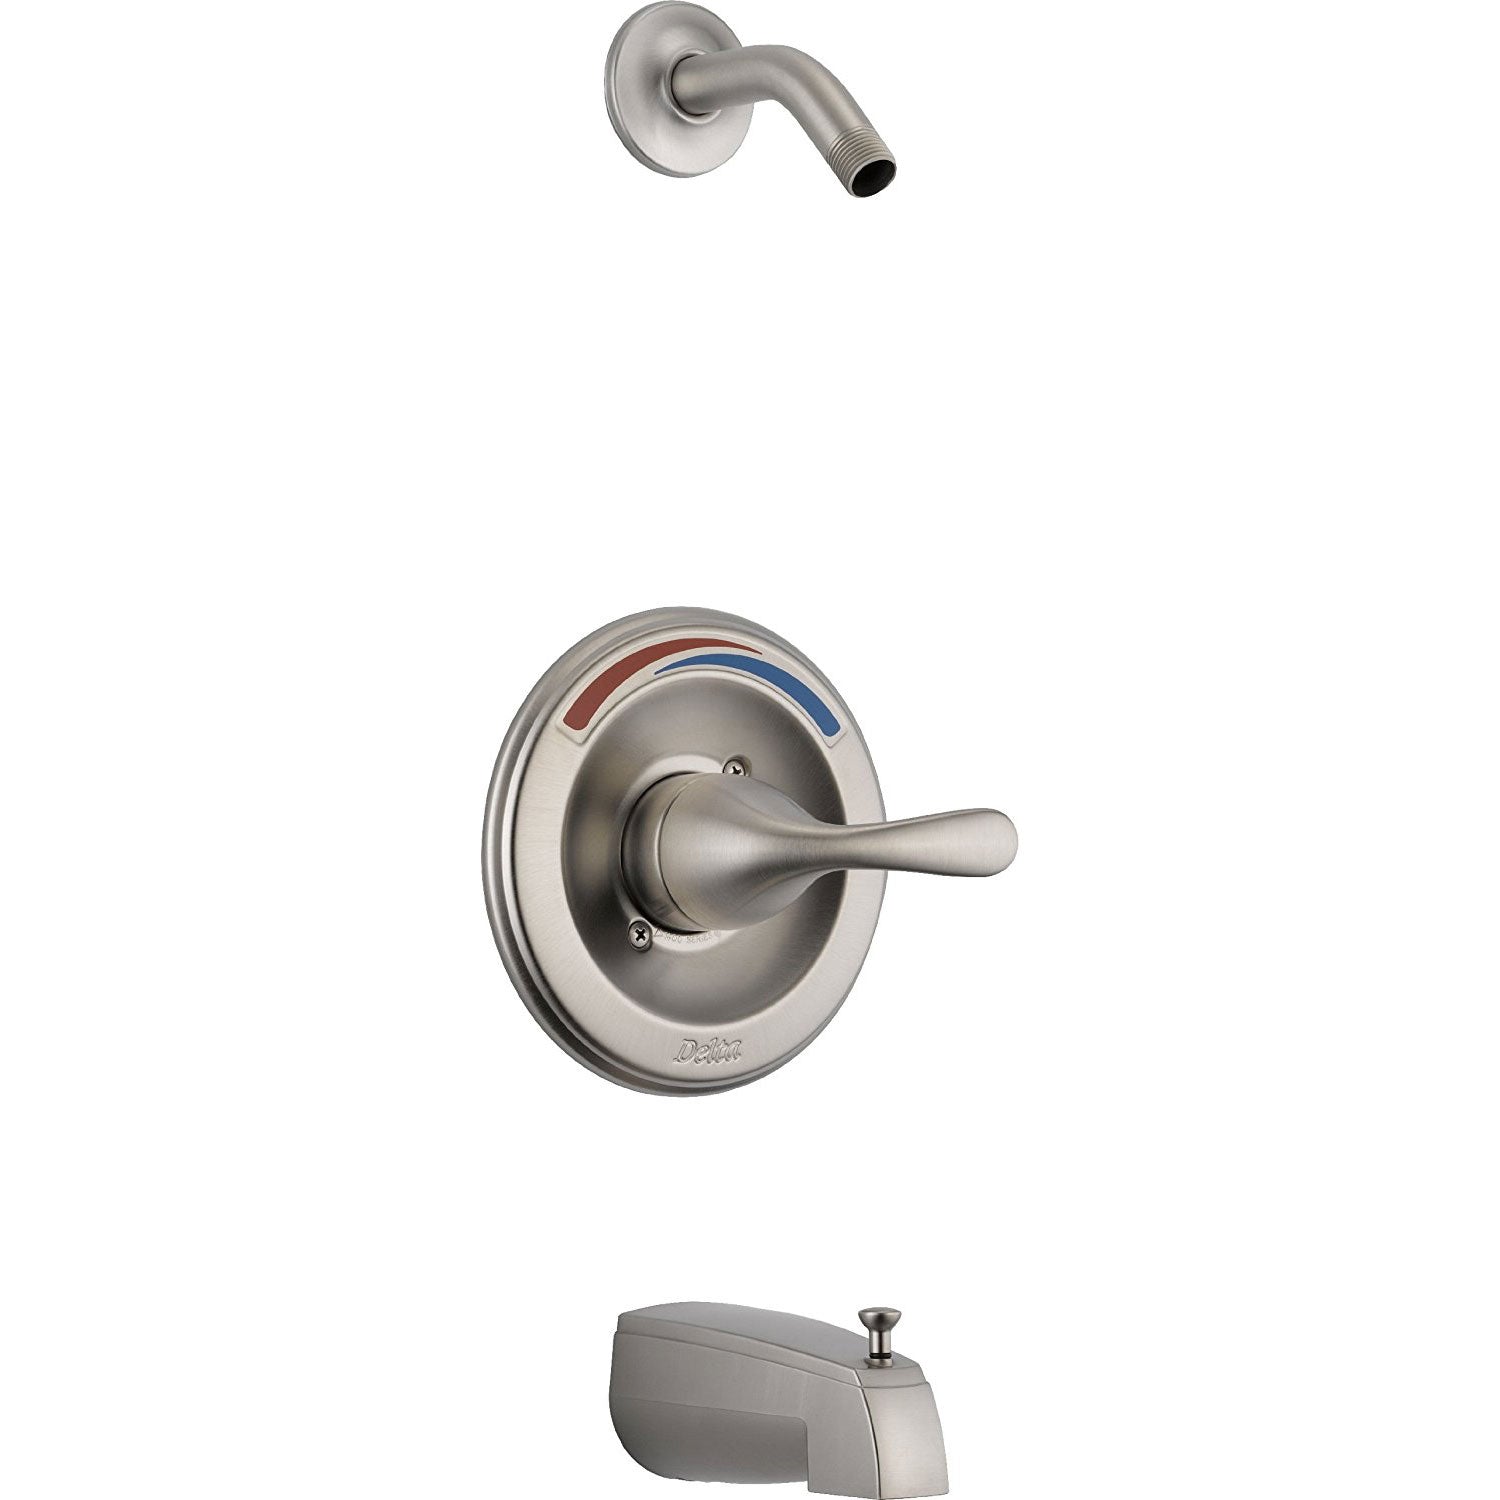 Delta Stainless Steel Finish Monitor 13 Series Classic One Handle Tub and Shower Faucet Trim - Less Showerhead (Valve Sold Separately) DT13491SSLHD